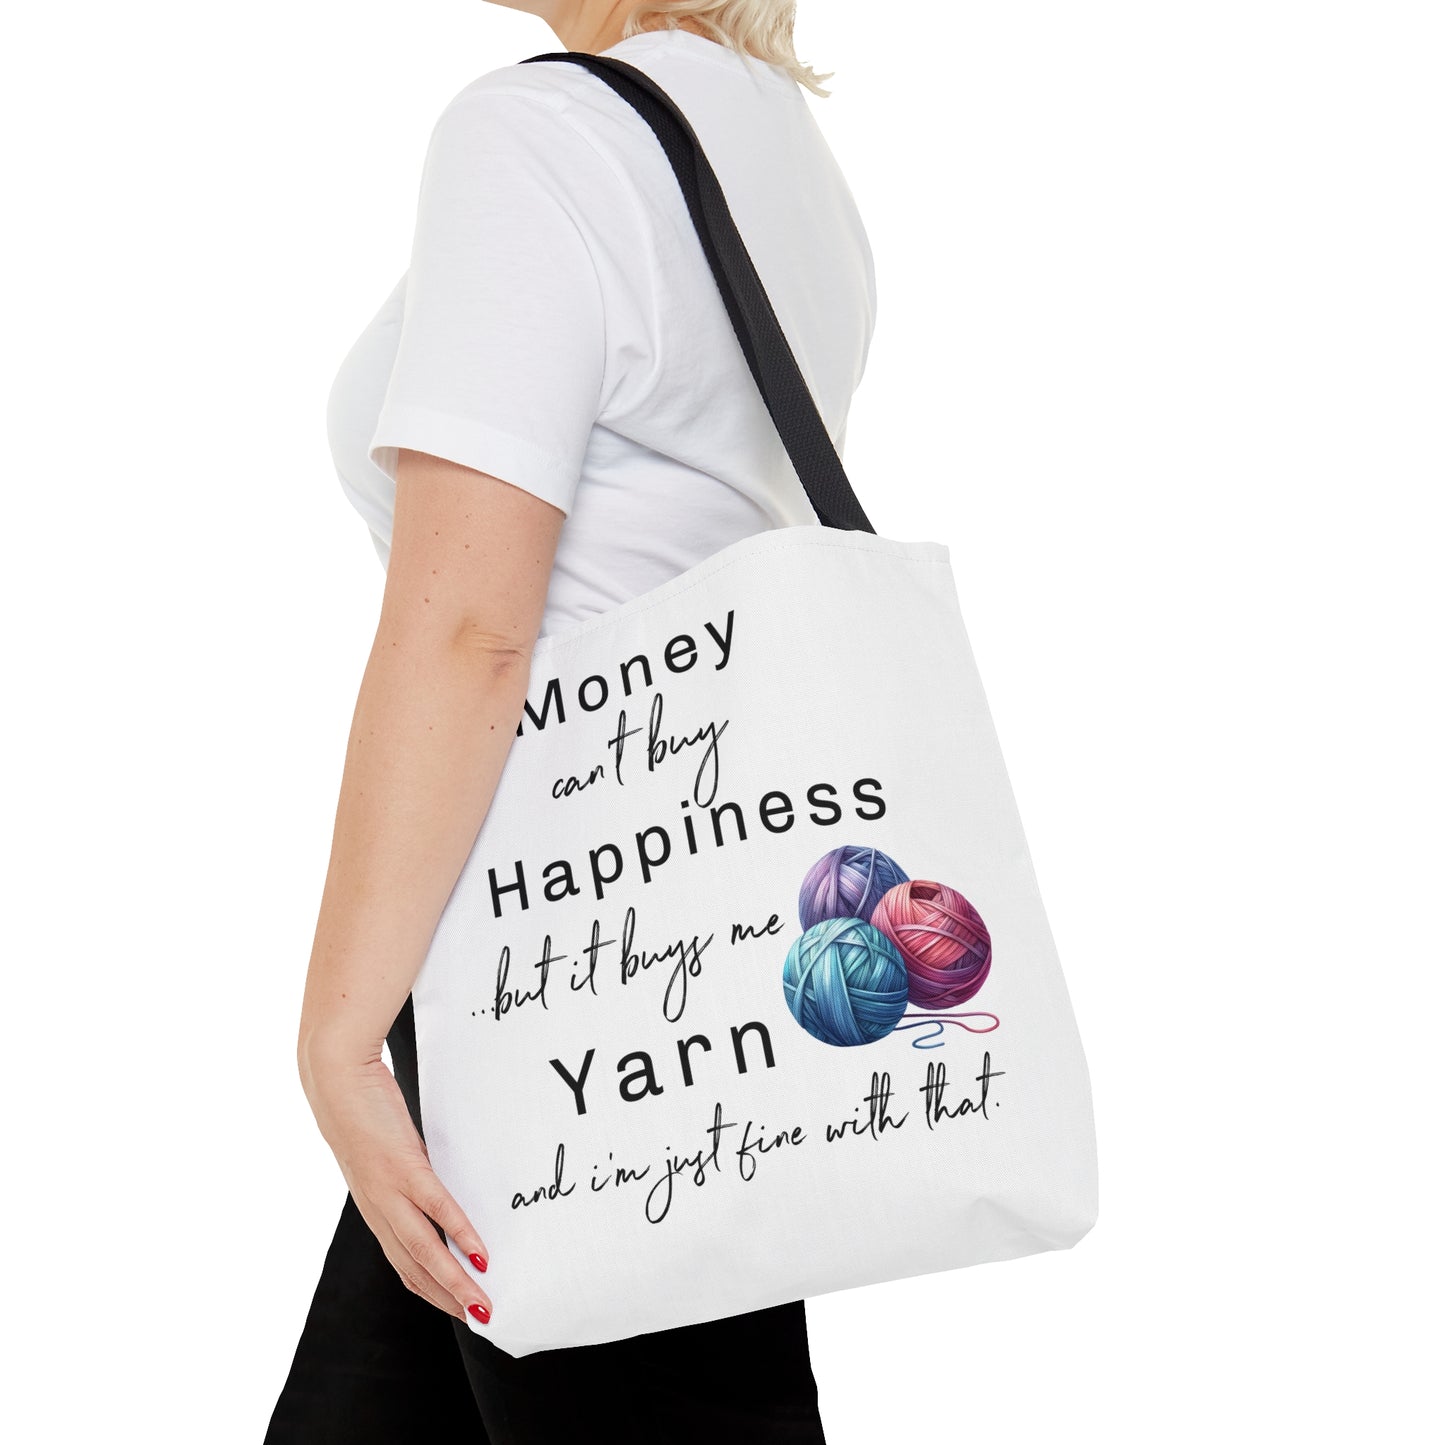 Bag for Yarn, Tote Bag for Knitter, Bag for Crochet Project, Gift for Yarn Lover, Project Bag, Money Can't Buy Happiness Bag, Funny Yarn Bag